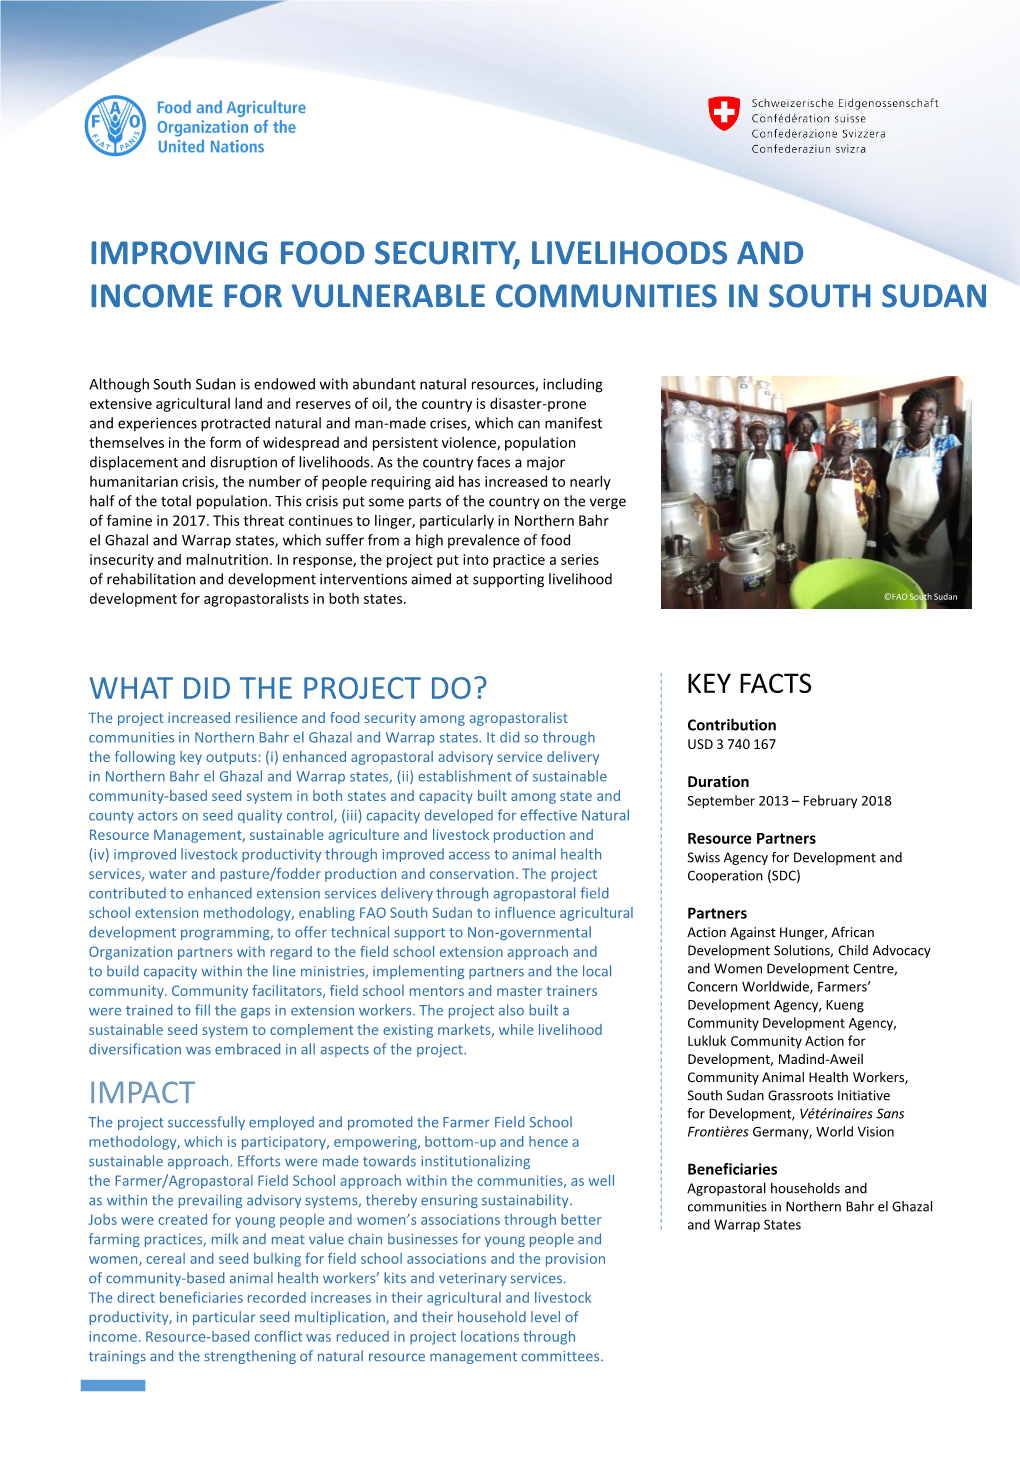 Improving Food Security, Livelihoods and Income for Vulnerable Communities in South Sudan